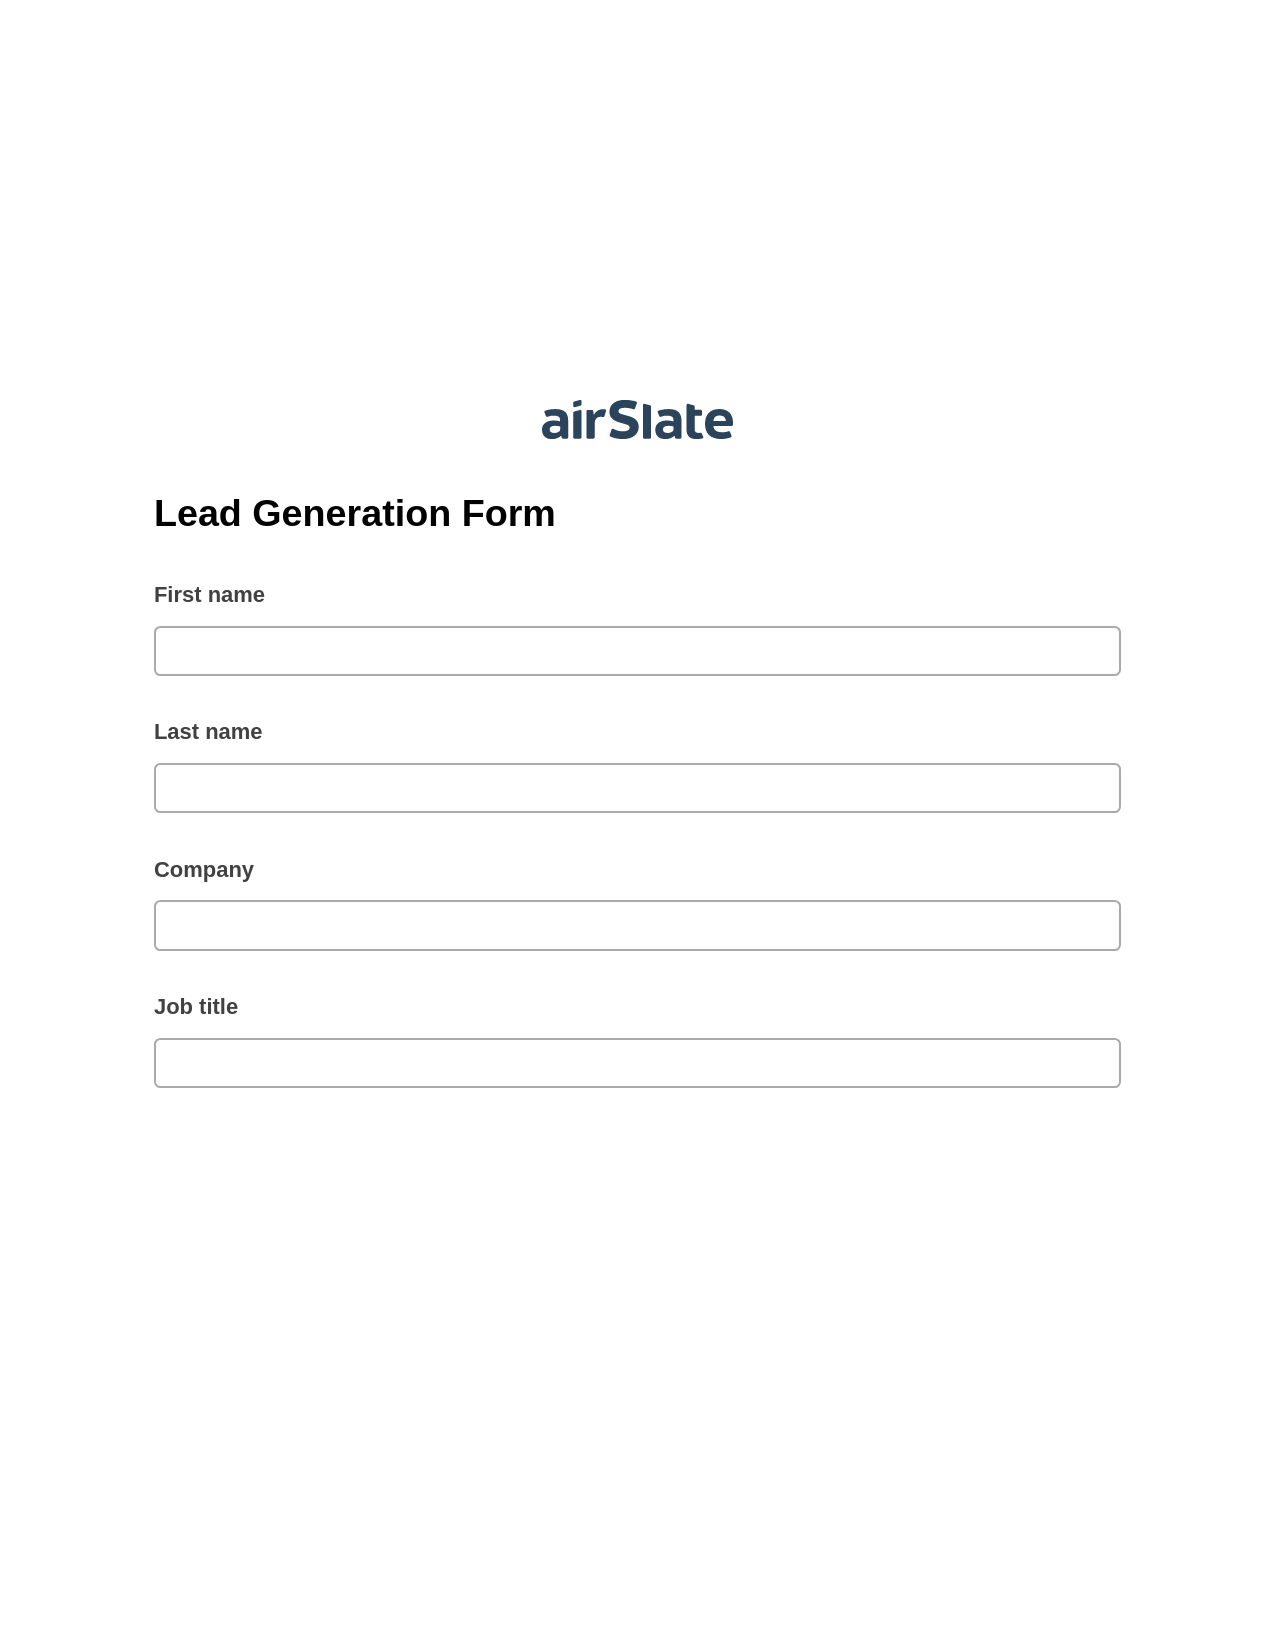 Lead Generation Form Pre-fill Document Bot, Send a Slate with Roles Bot, Slack Two-Way Binding Bot